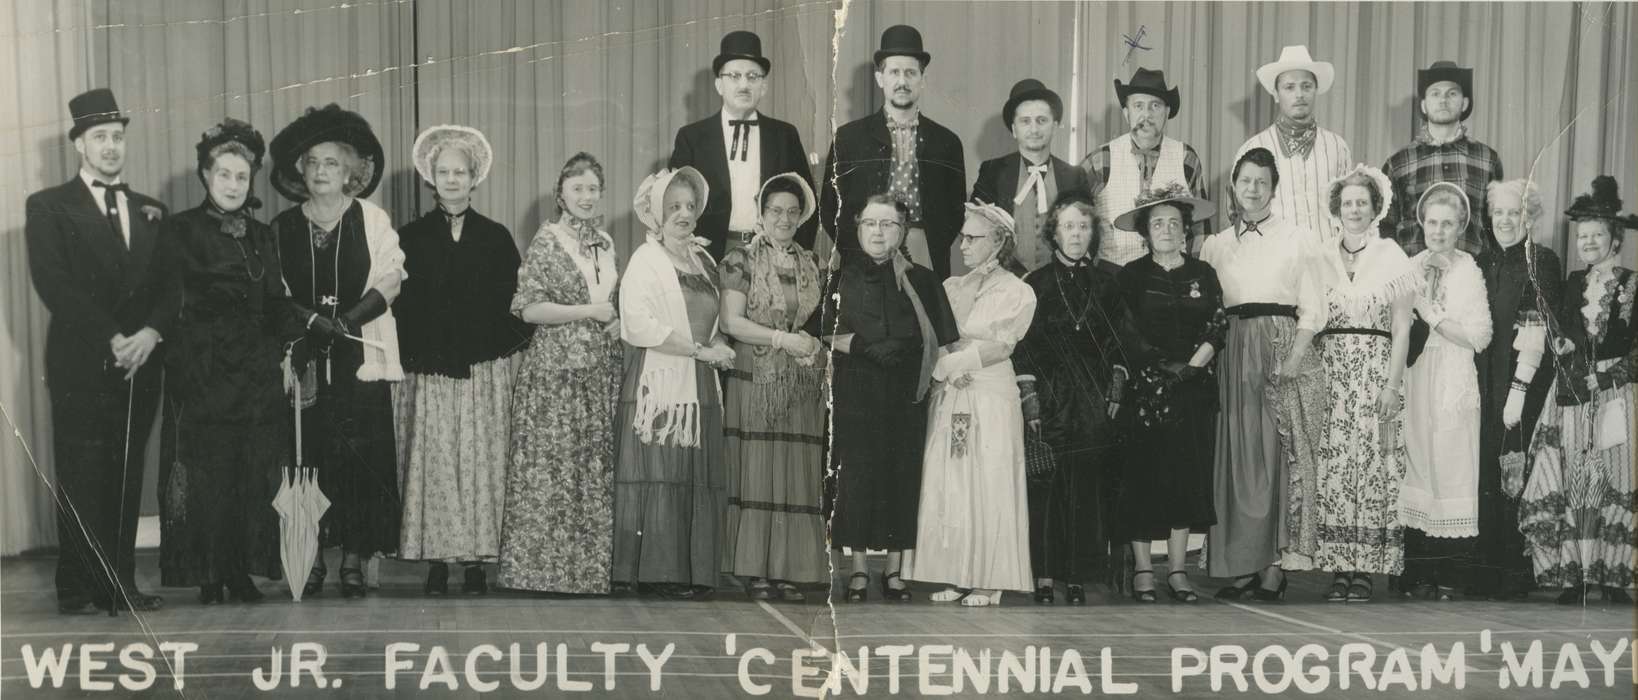 umbrella, play, Schools and Education, Rossiter, Lynn, cowboy hat, stage, Sioux City, IA, Iowa History, Portraits - Group, Iowa, history of Iowa, performance, Entertainment